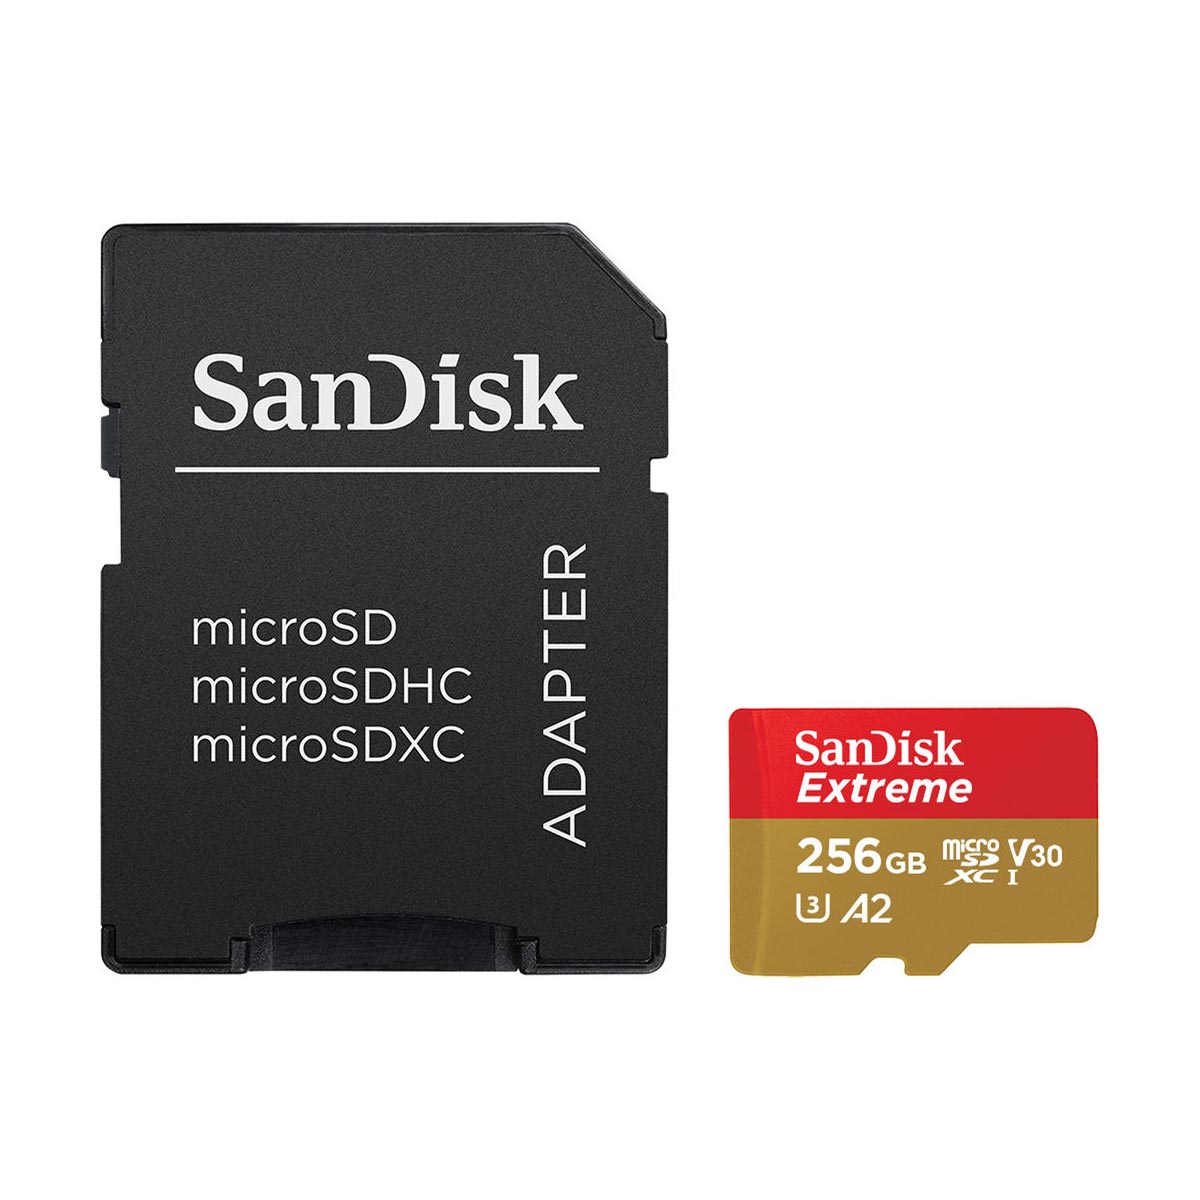 SanDisk 256GB Extreme UHS-I microSDXC 190mb/s Memory Card with SD Adapter